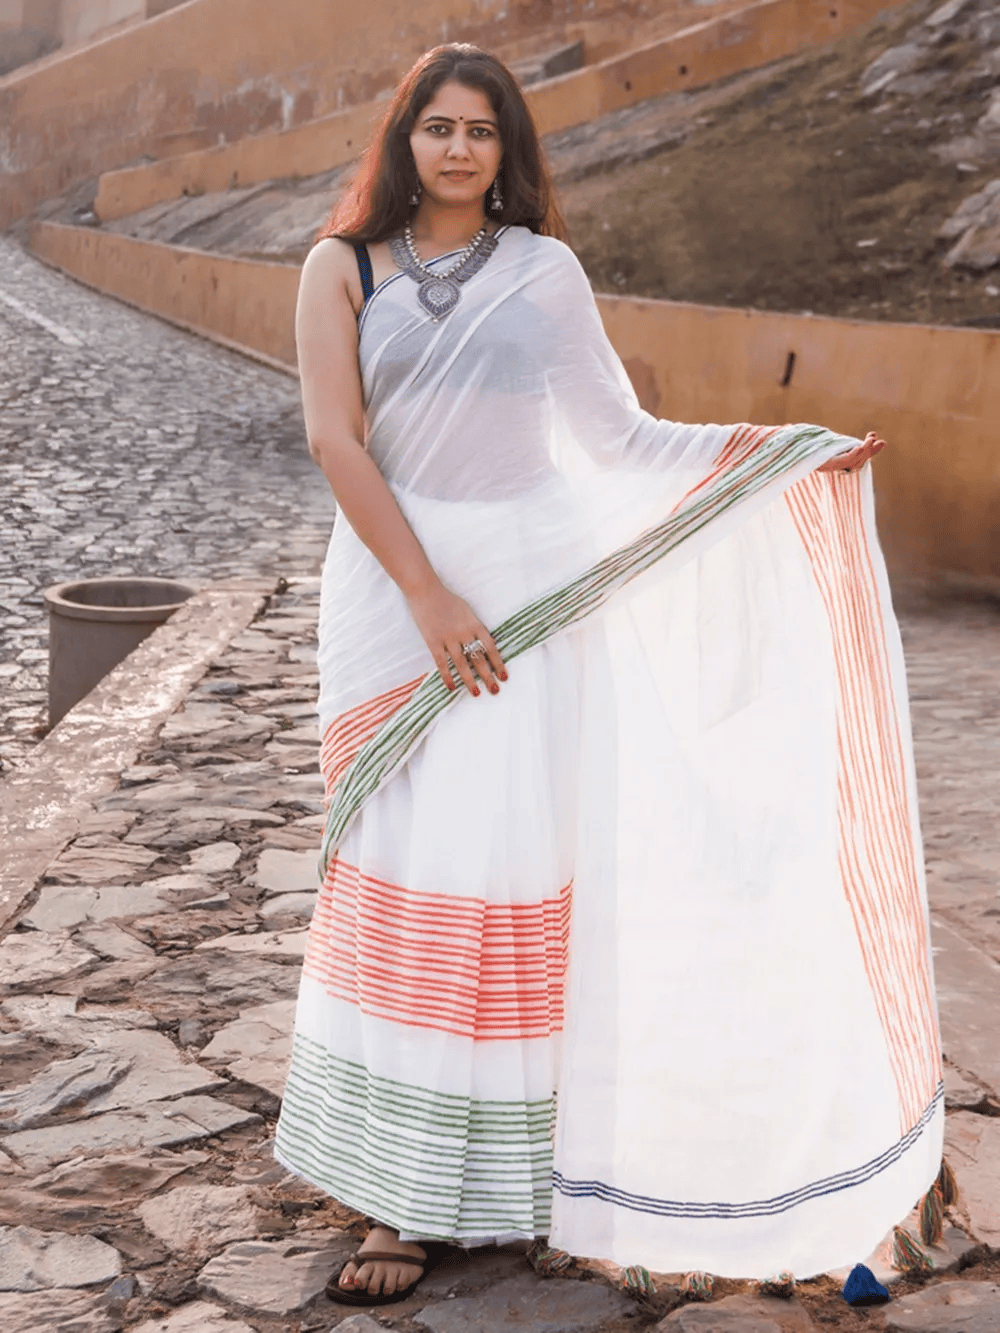 Dress Up in Tricolour on 26th January Republic Day – Suzy Smith